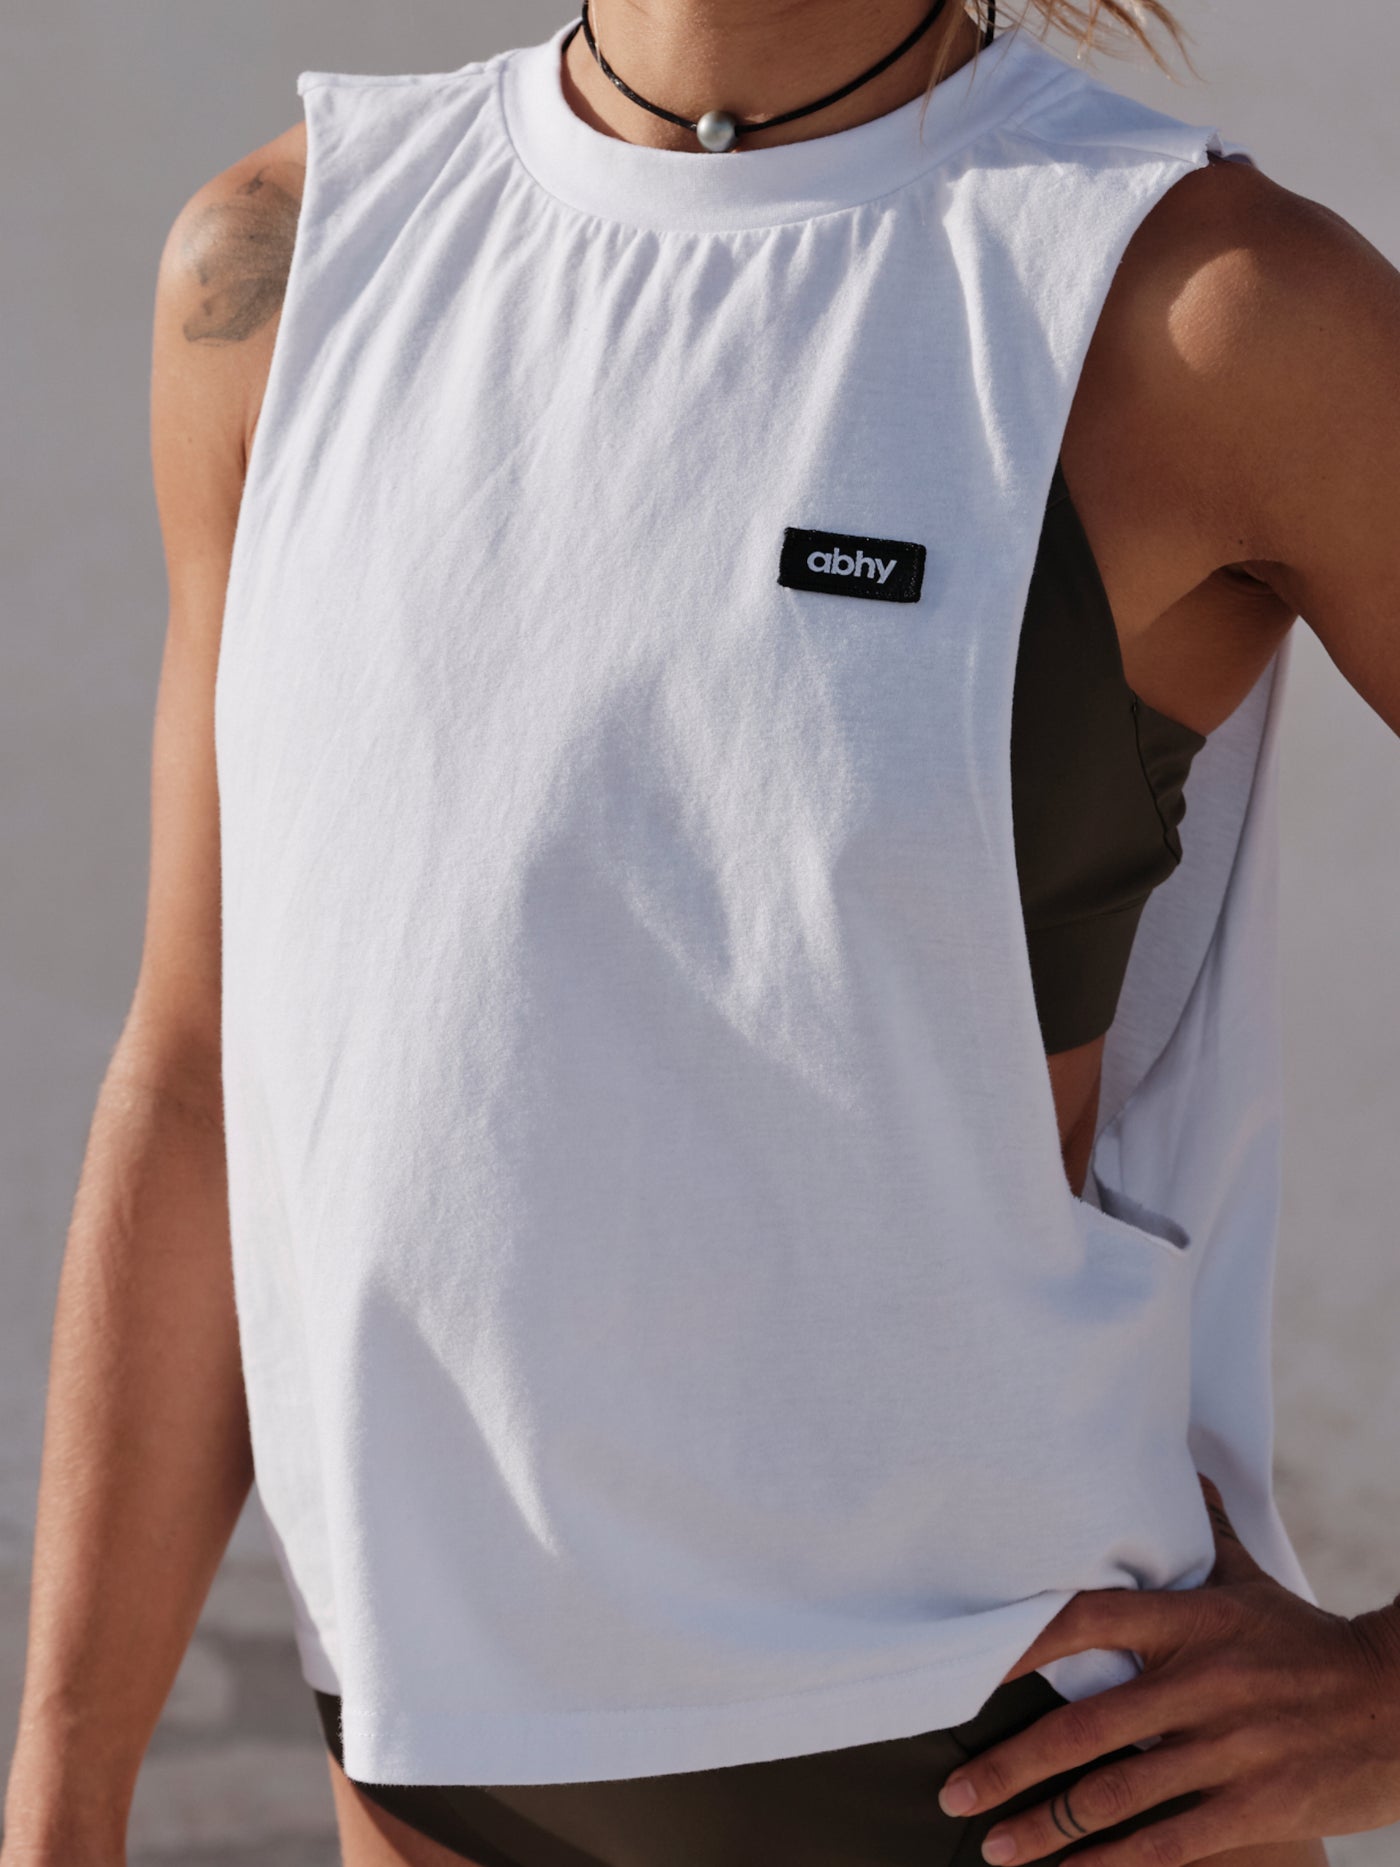 Cut-off Tank - Pure White - abhy®